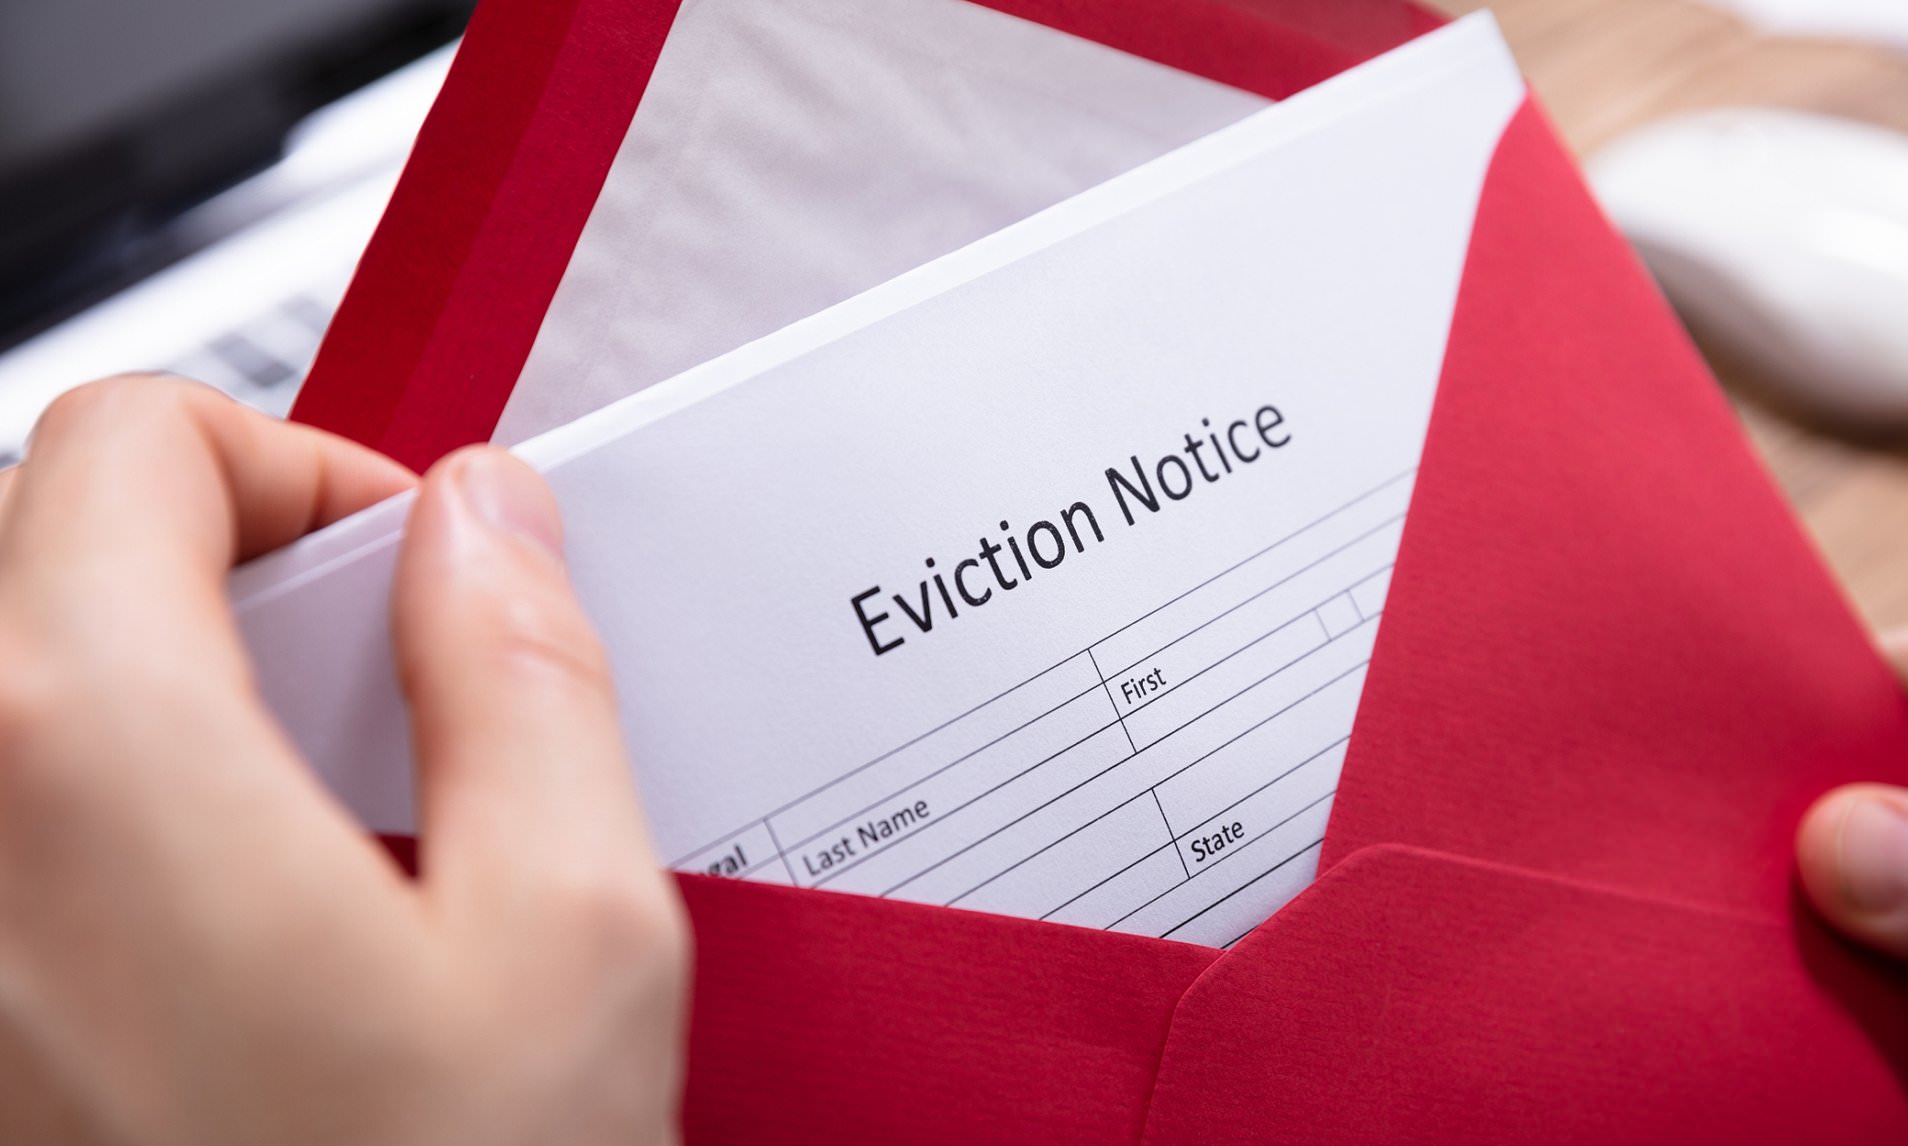 Eviction notice 